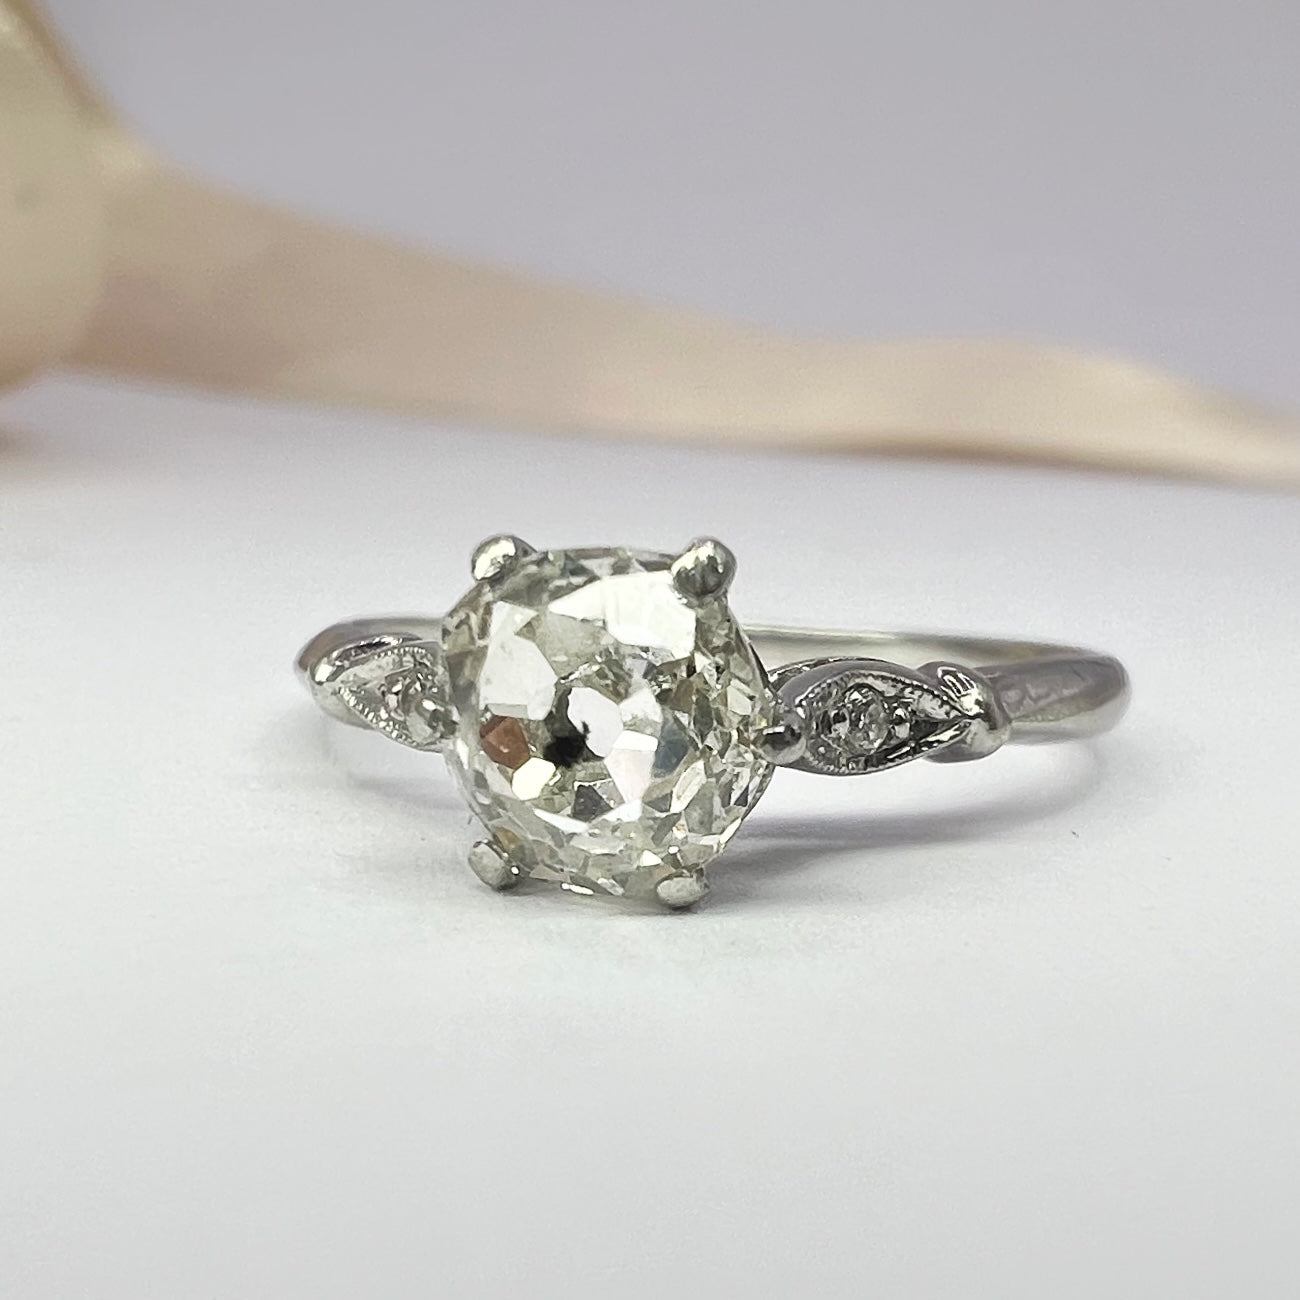 Antique 0.75ct Old Cut Diamond Solitaire Ring